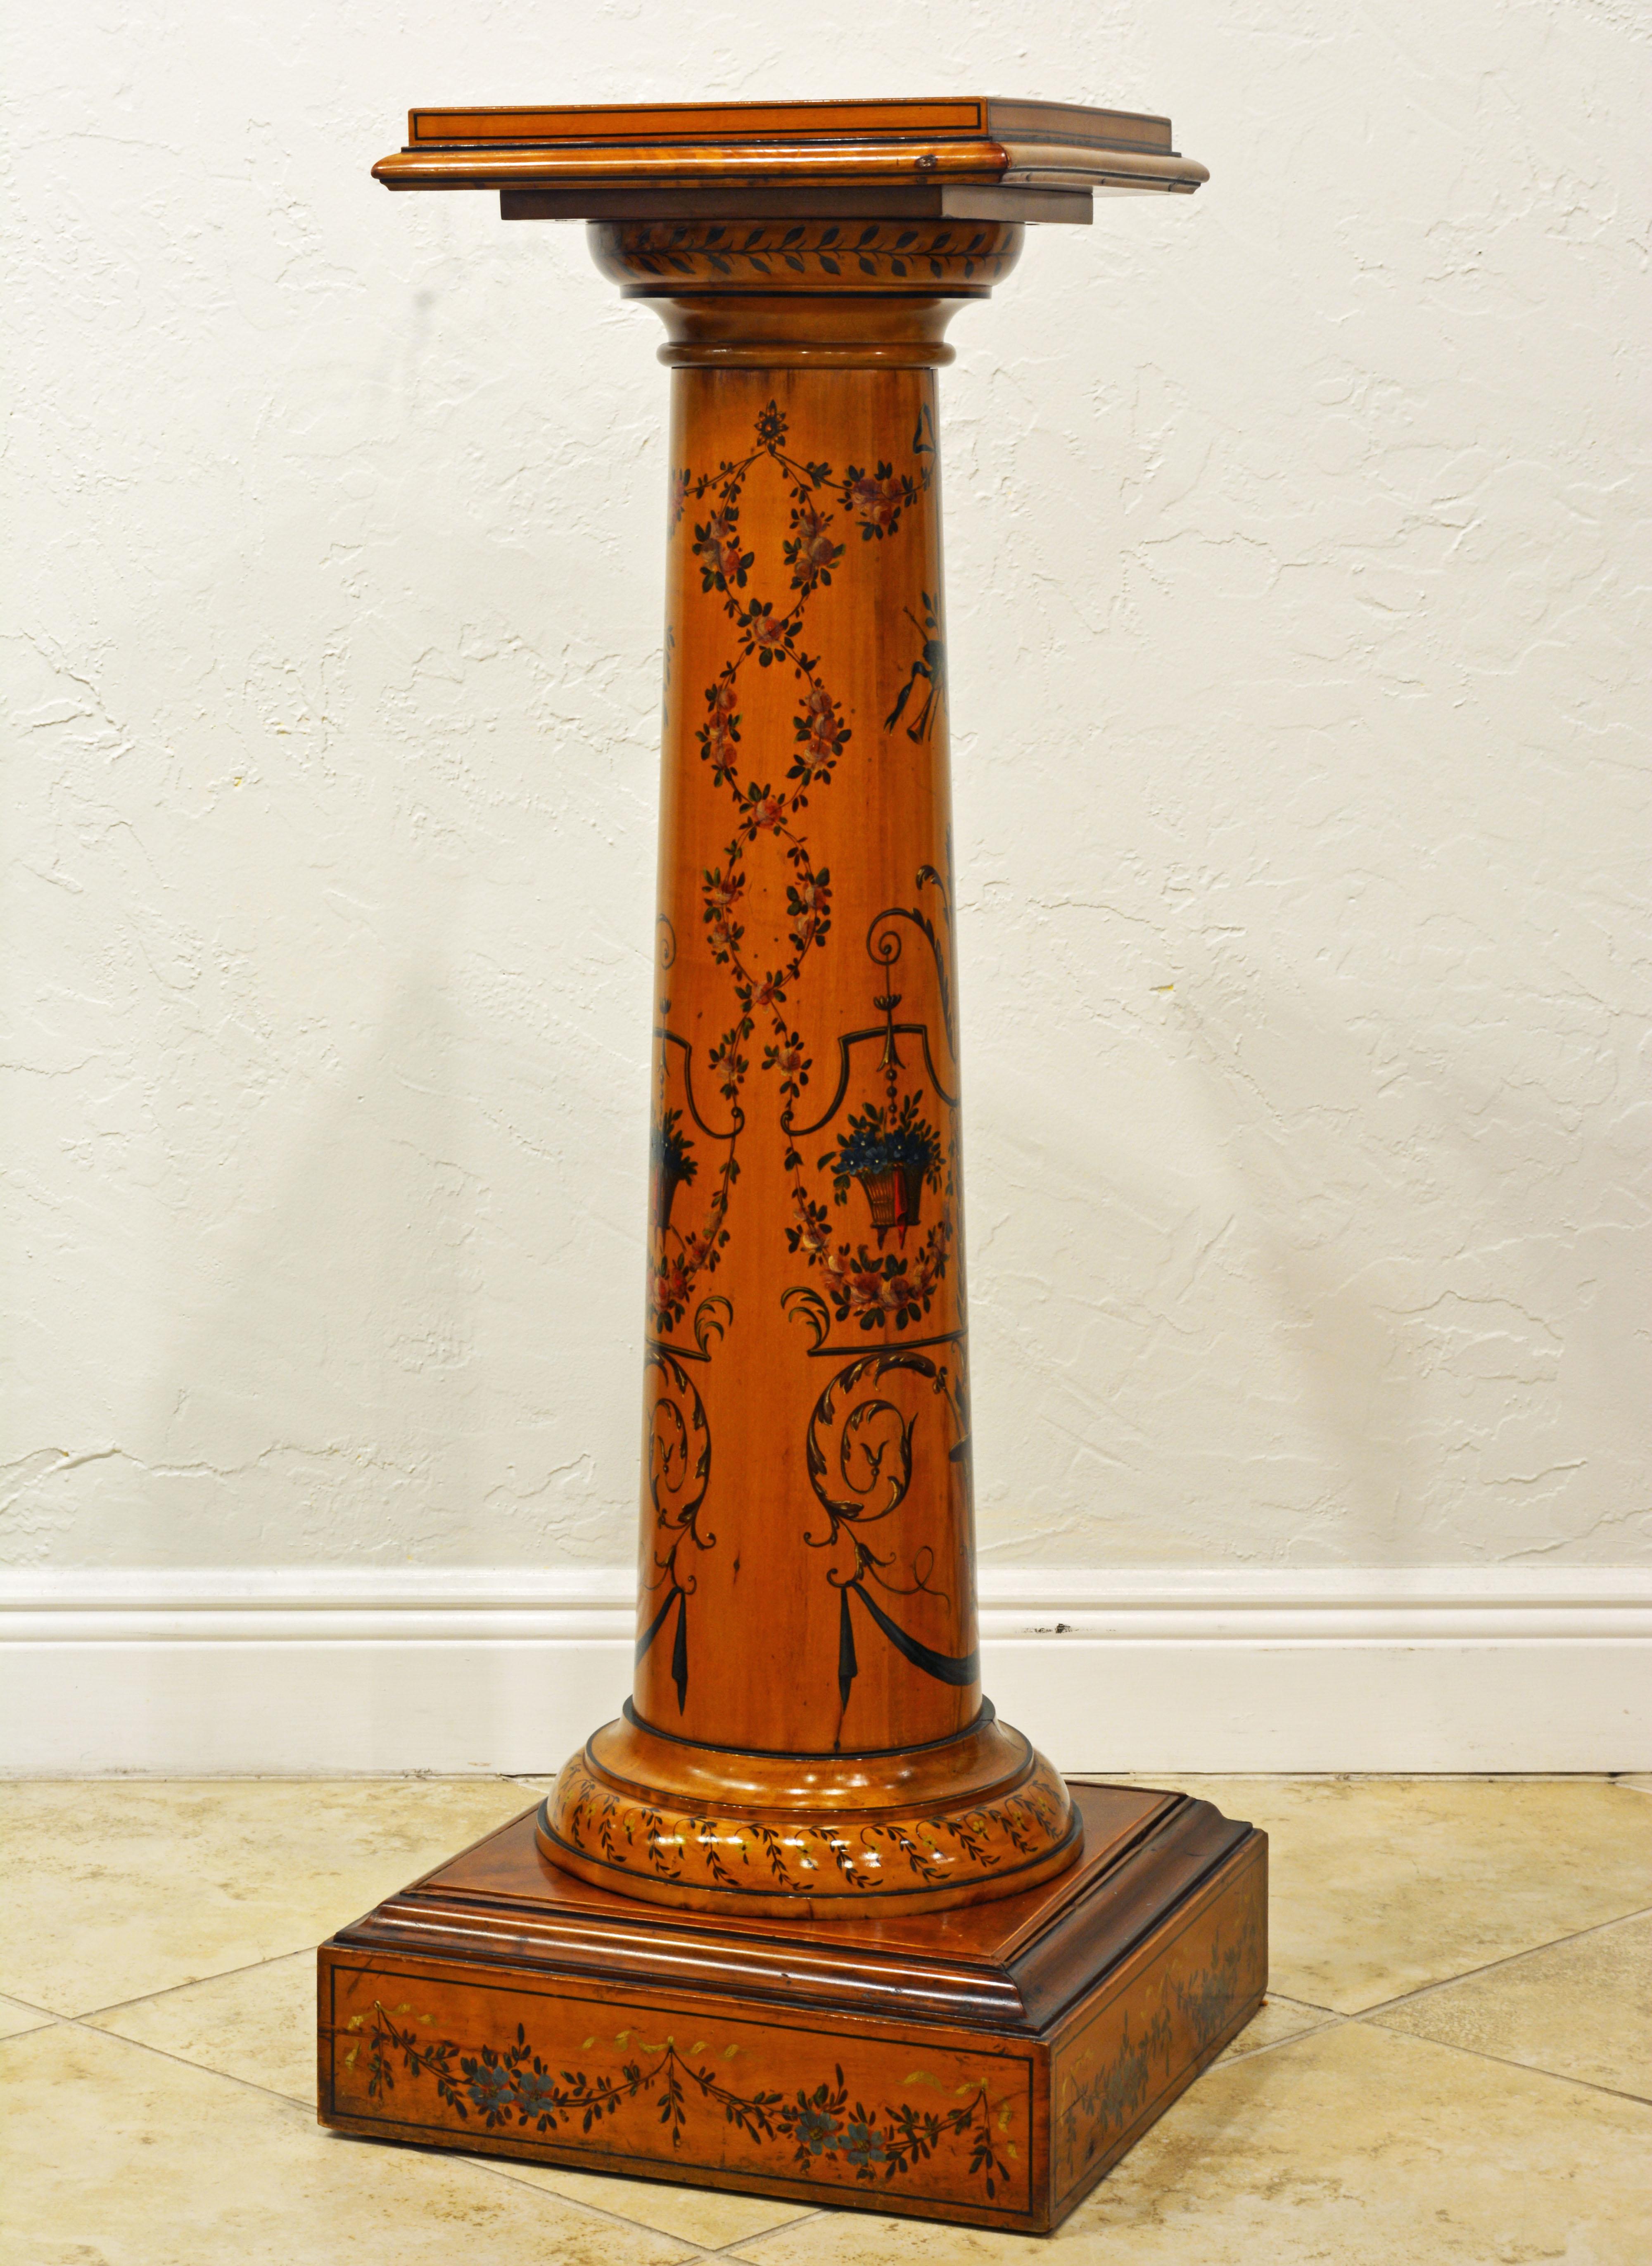 This graceful Edwardian satinwood column pedestal is fashioned as a classical column in the Greco-Roman style. It is in two parts as shown on the photos. All surfaces are delicately painted in the Adam style featuring urns, garlands and flowers.